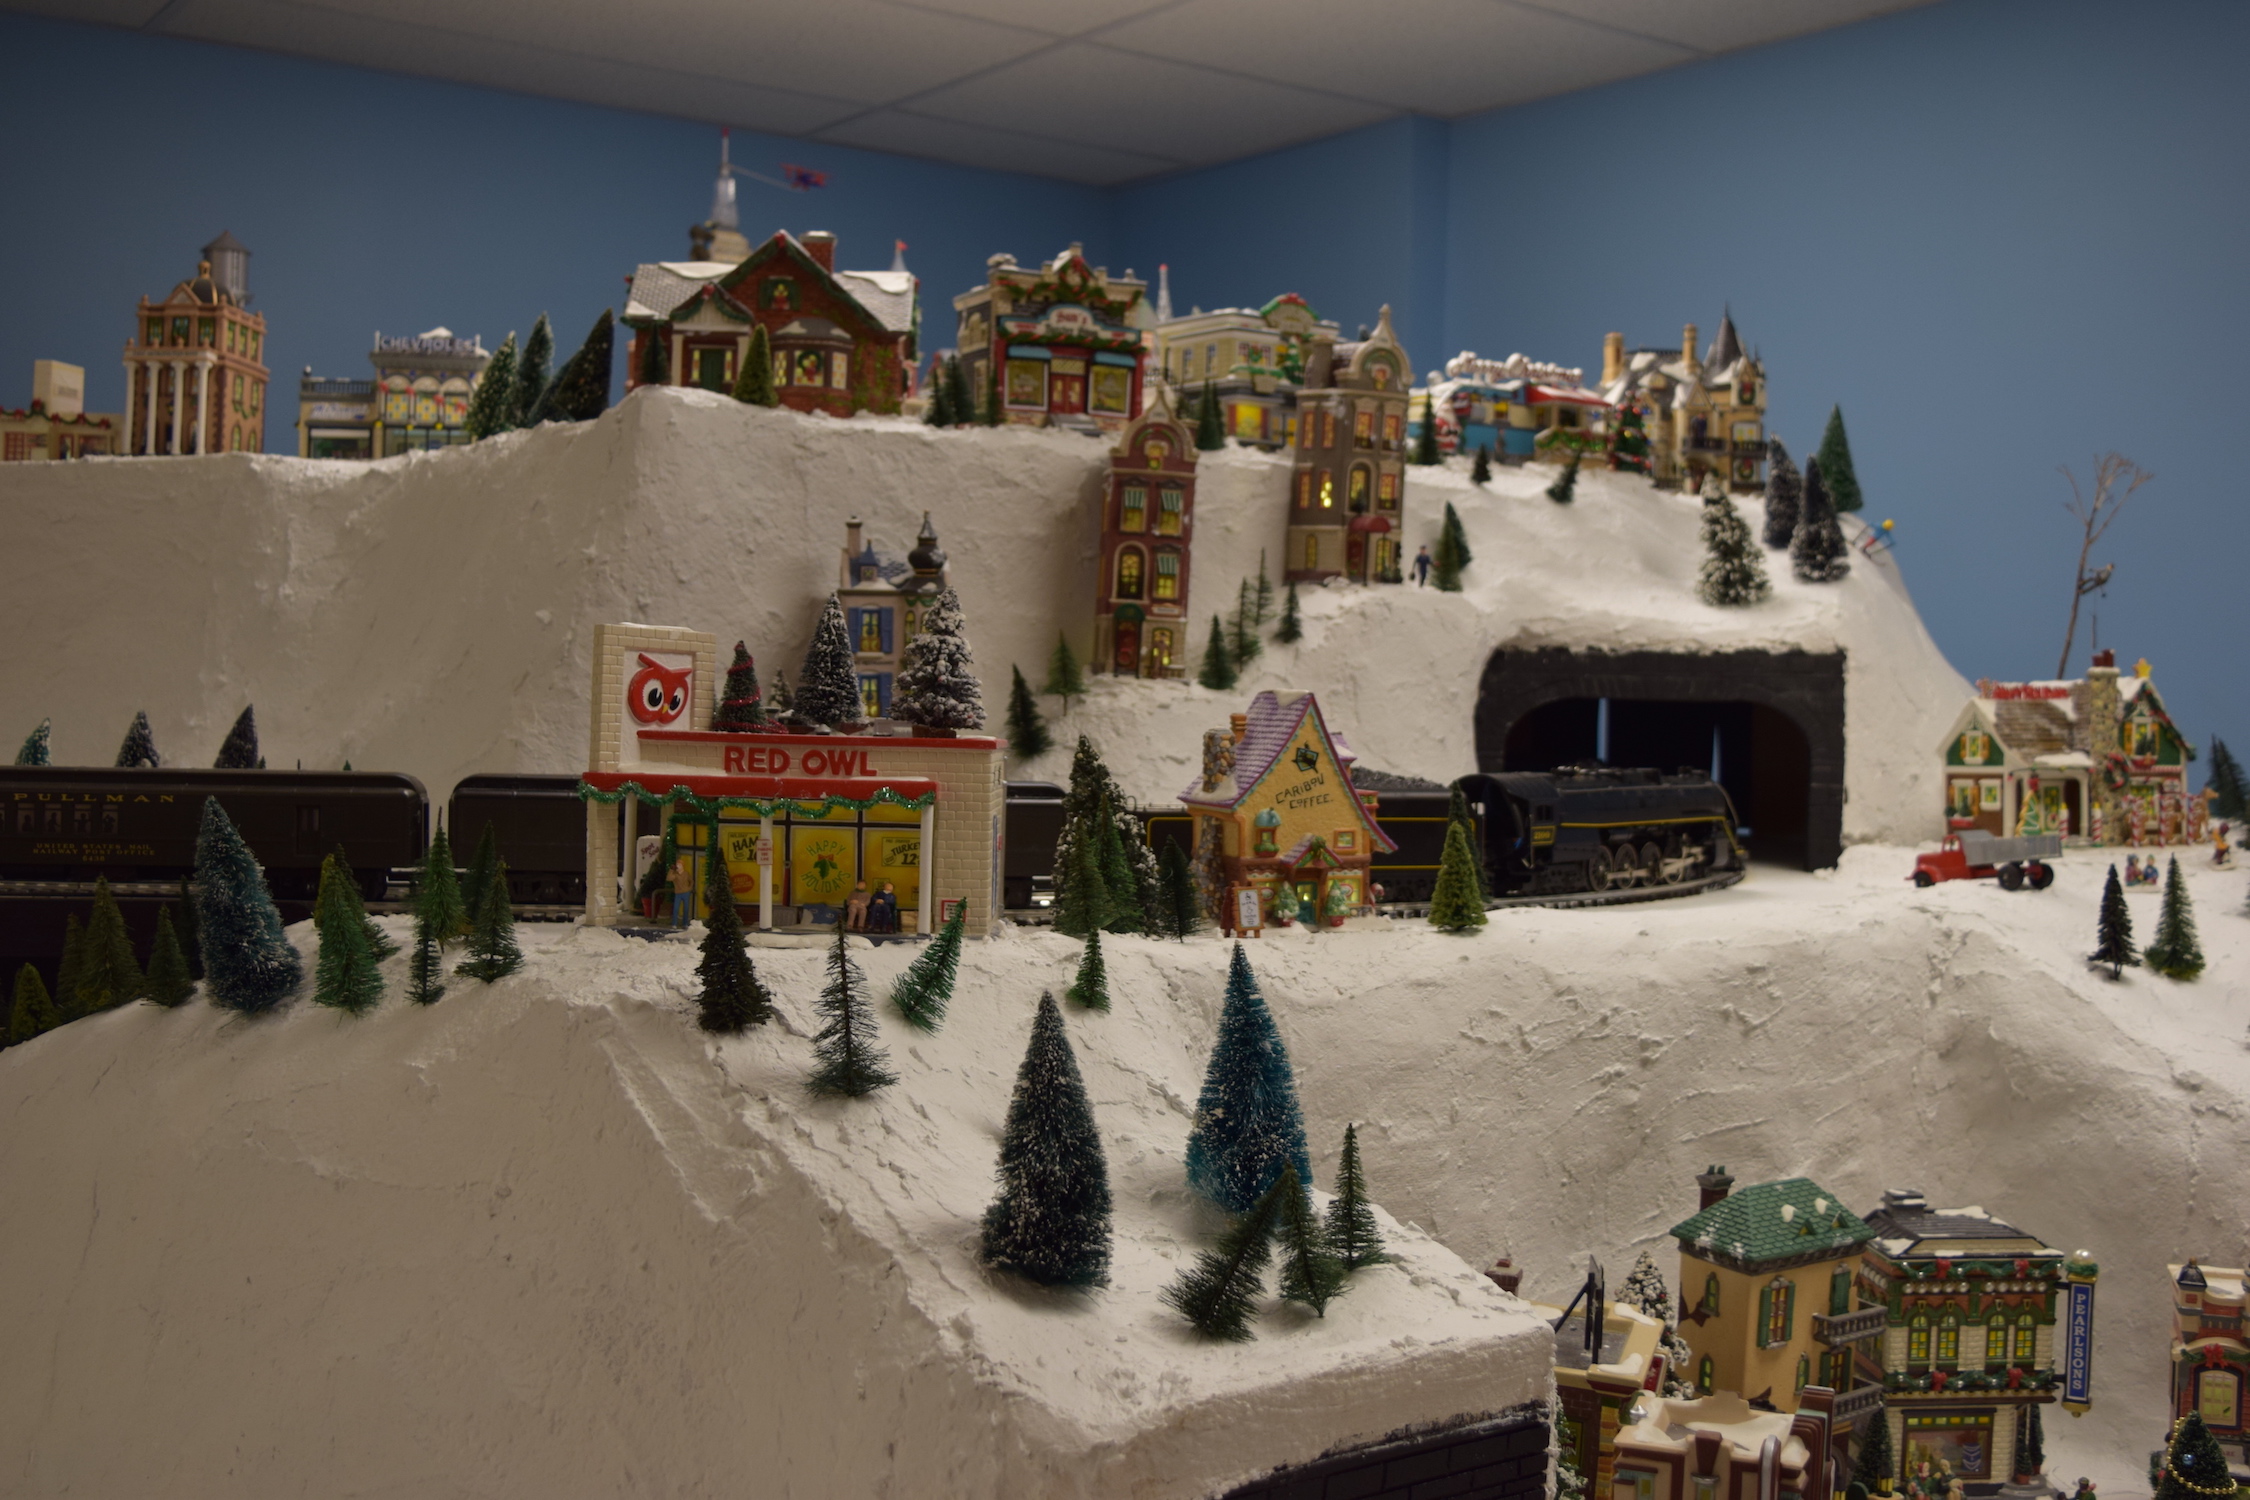 A winter scene in town - Christmas at the Roundhouse" model train display.